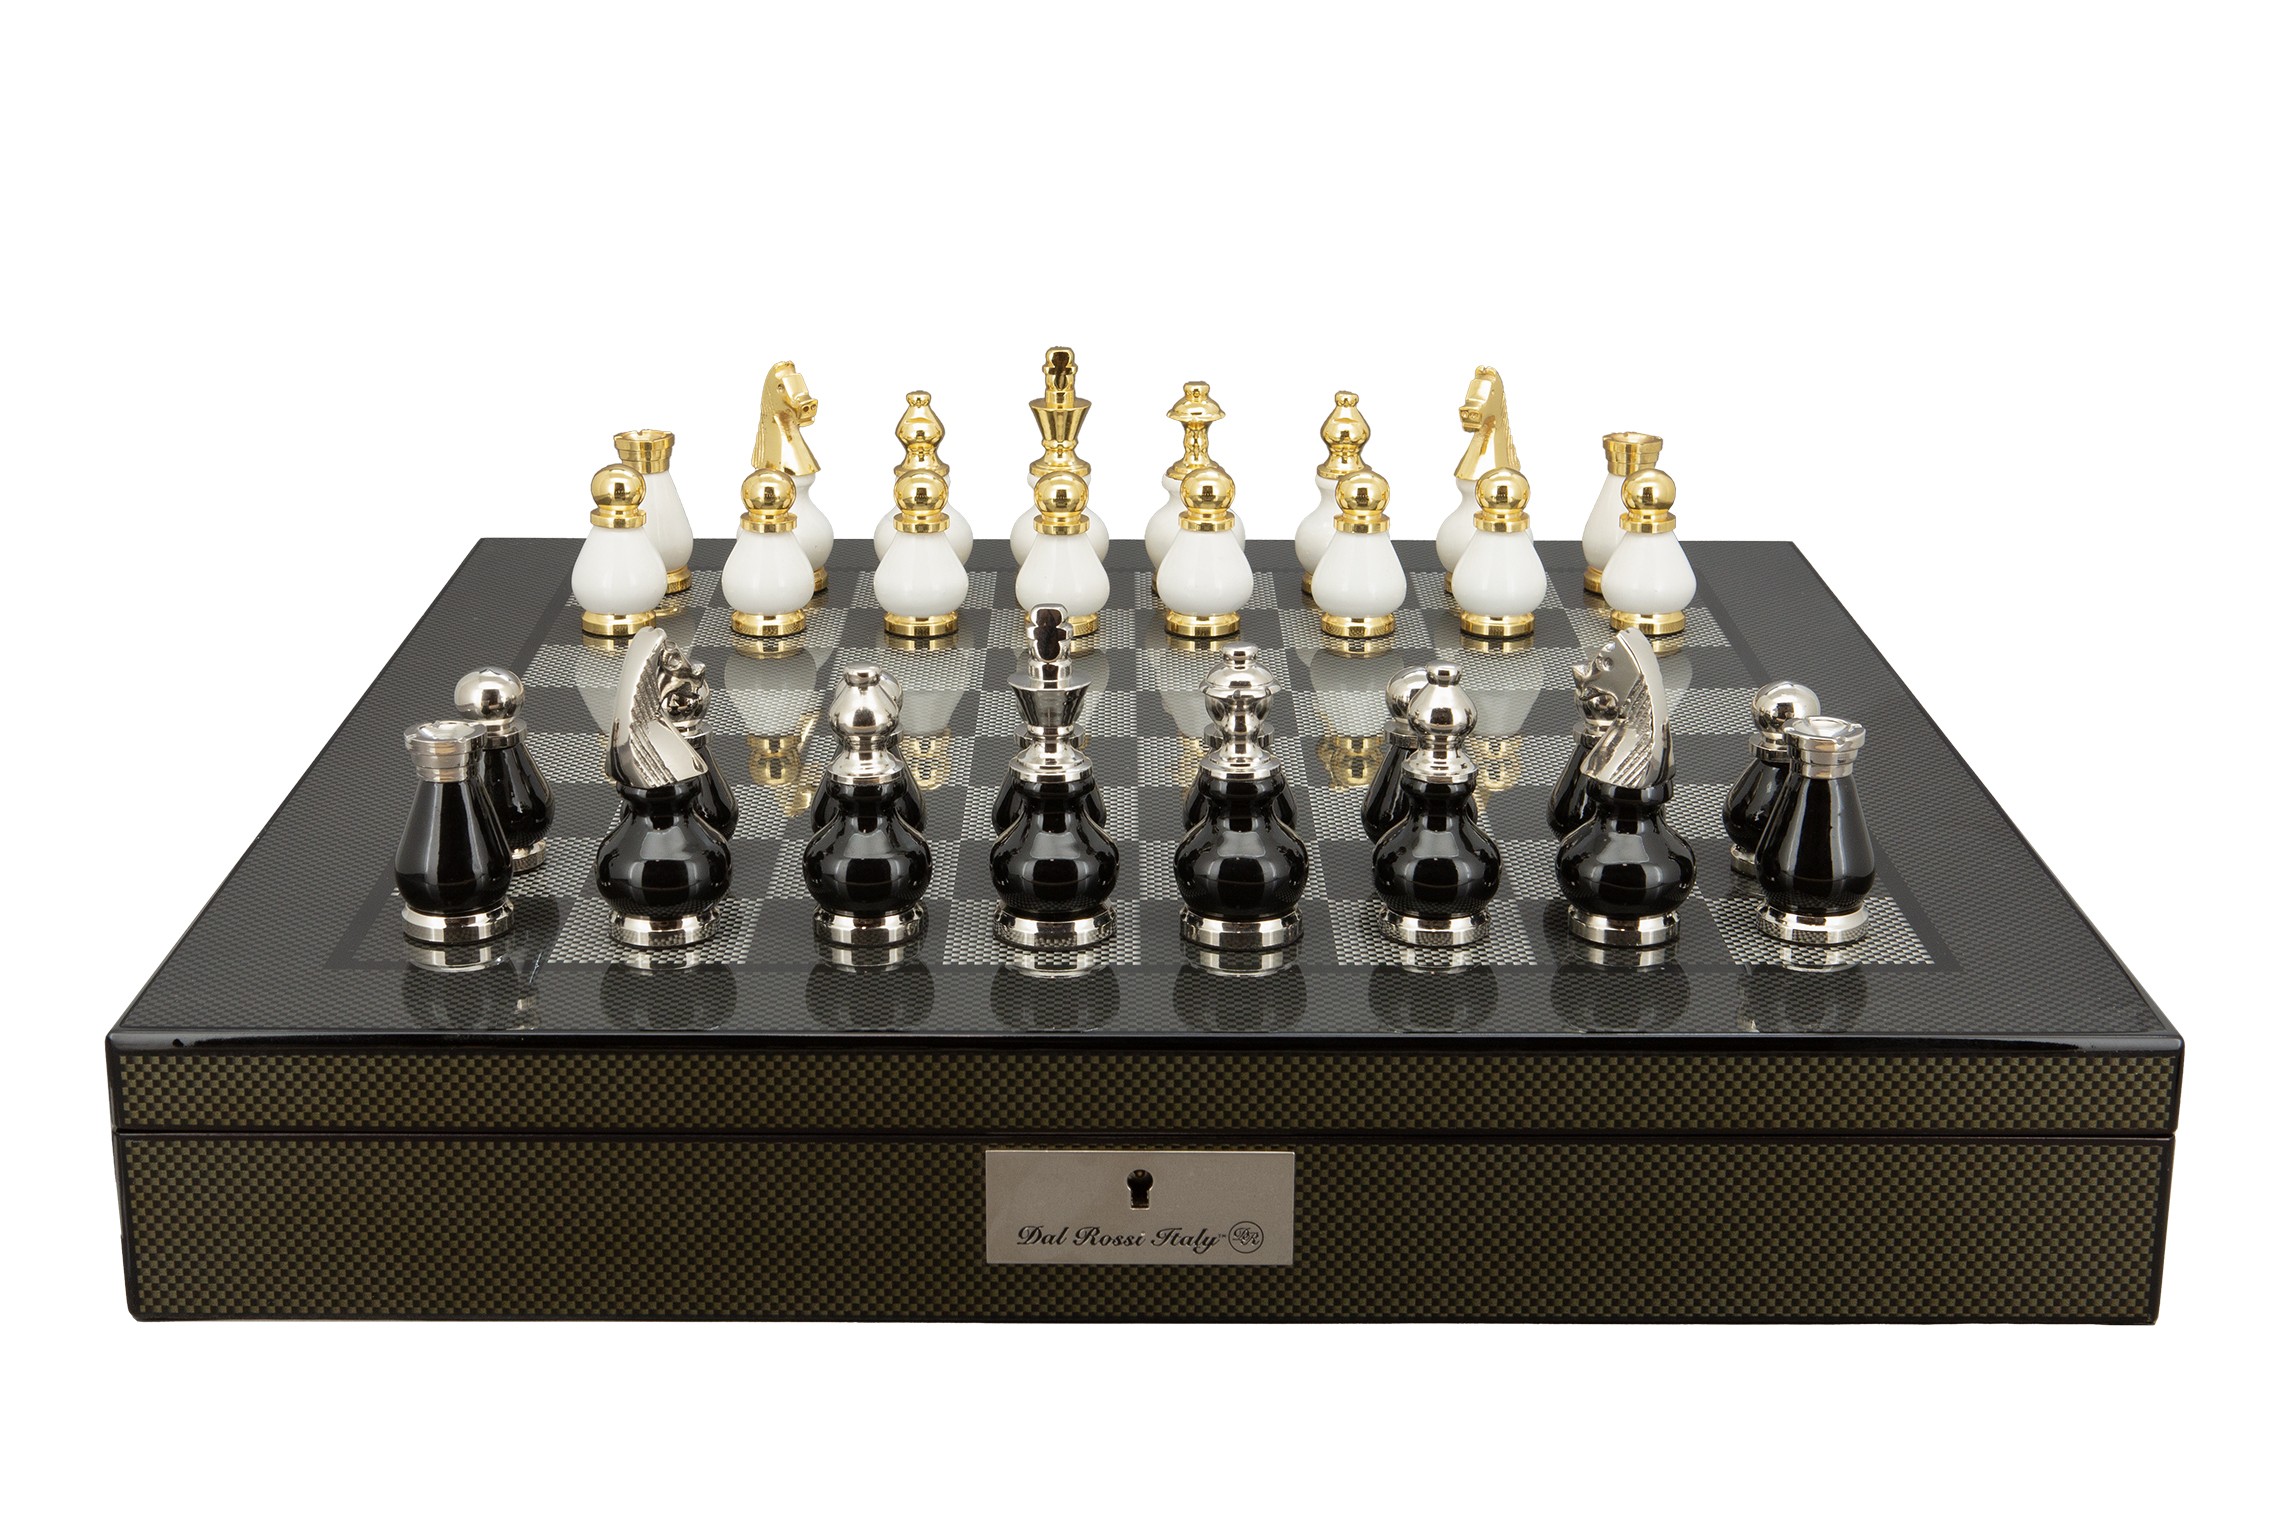 Dal Rossi Italy, Black and White with Gold and Silver Tops and Bottoms Chessmen 90mm on a Carbon Fibre Finish Shiny Chess Box with Compartments 20"